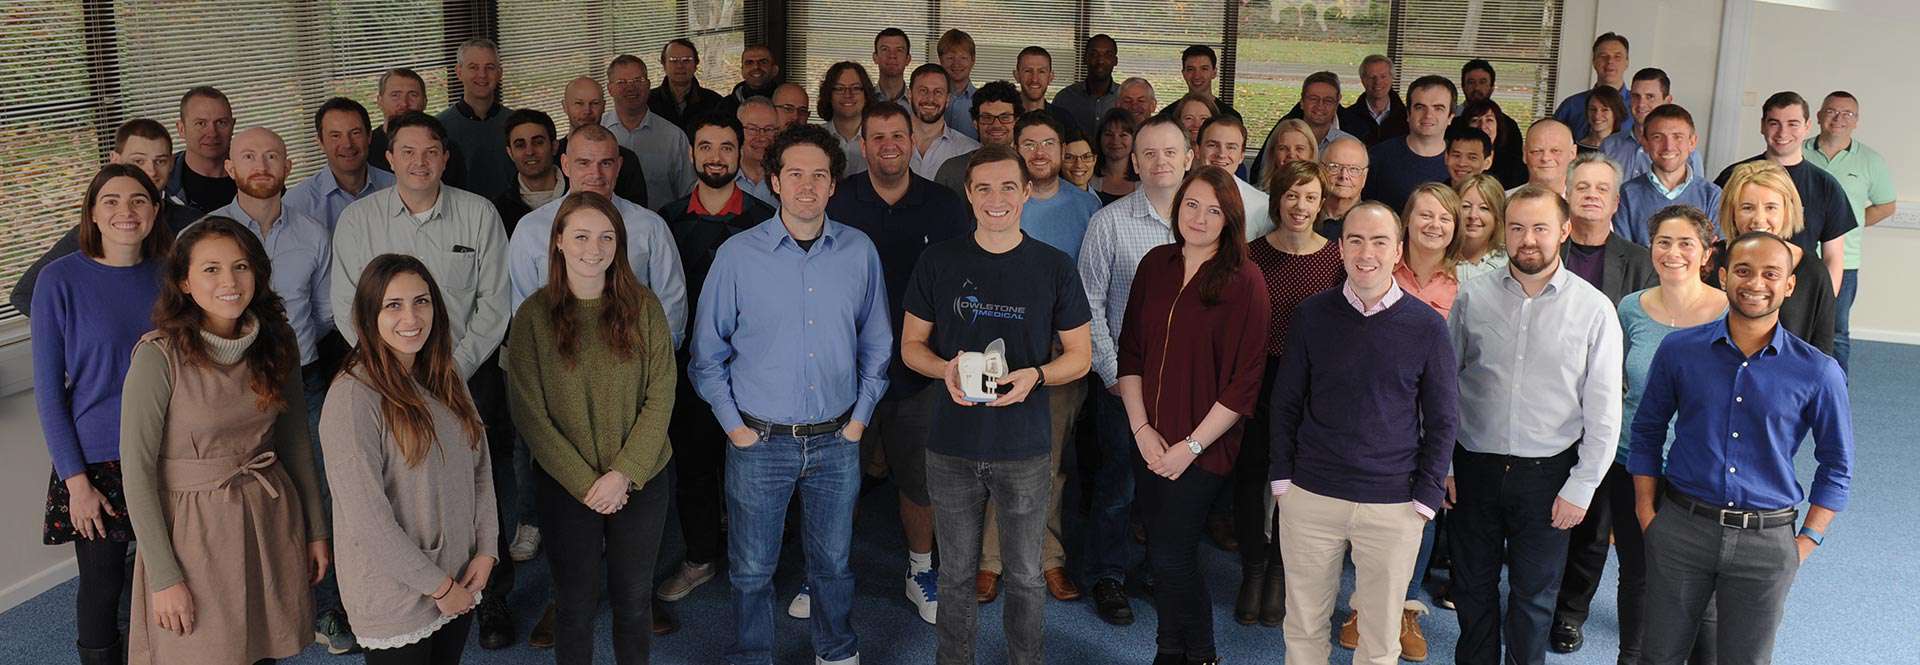 Owlstone team group picture